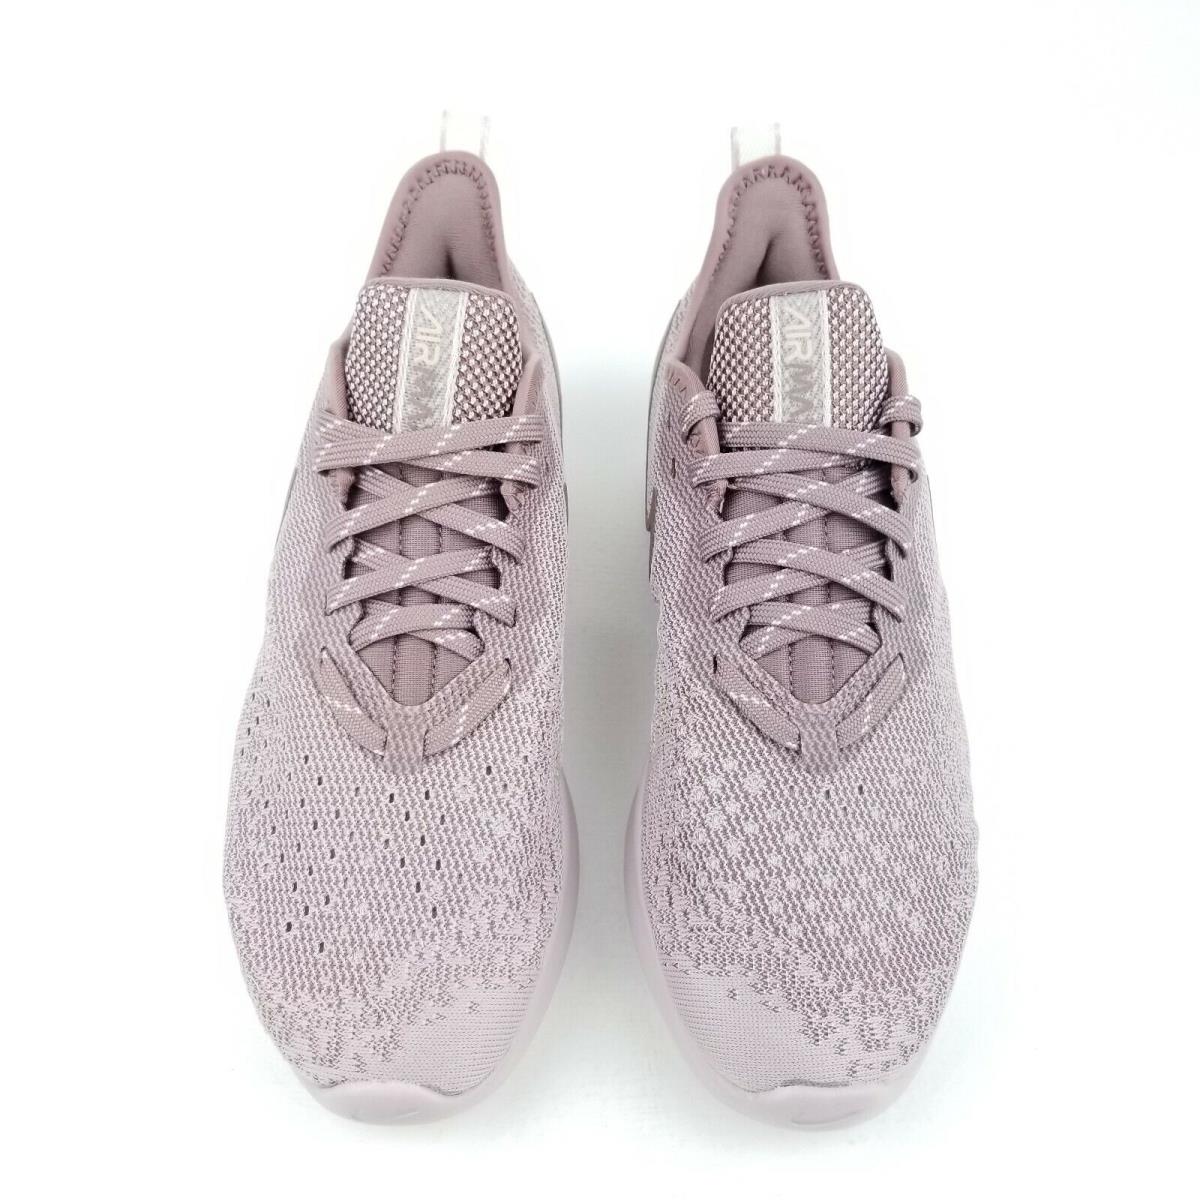 Nike shoes Air Max Sequent - Rose Pink 1